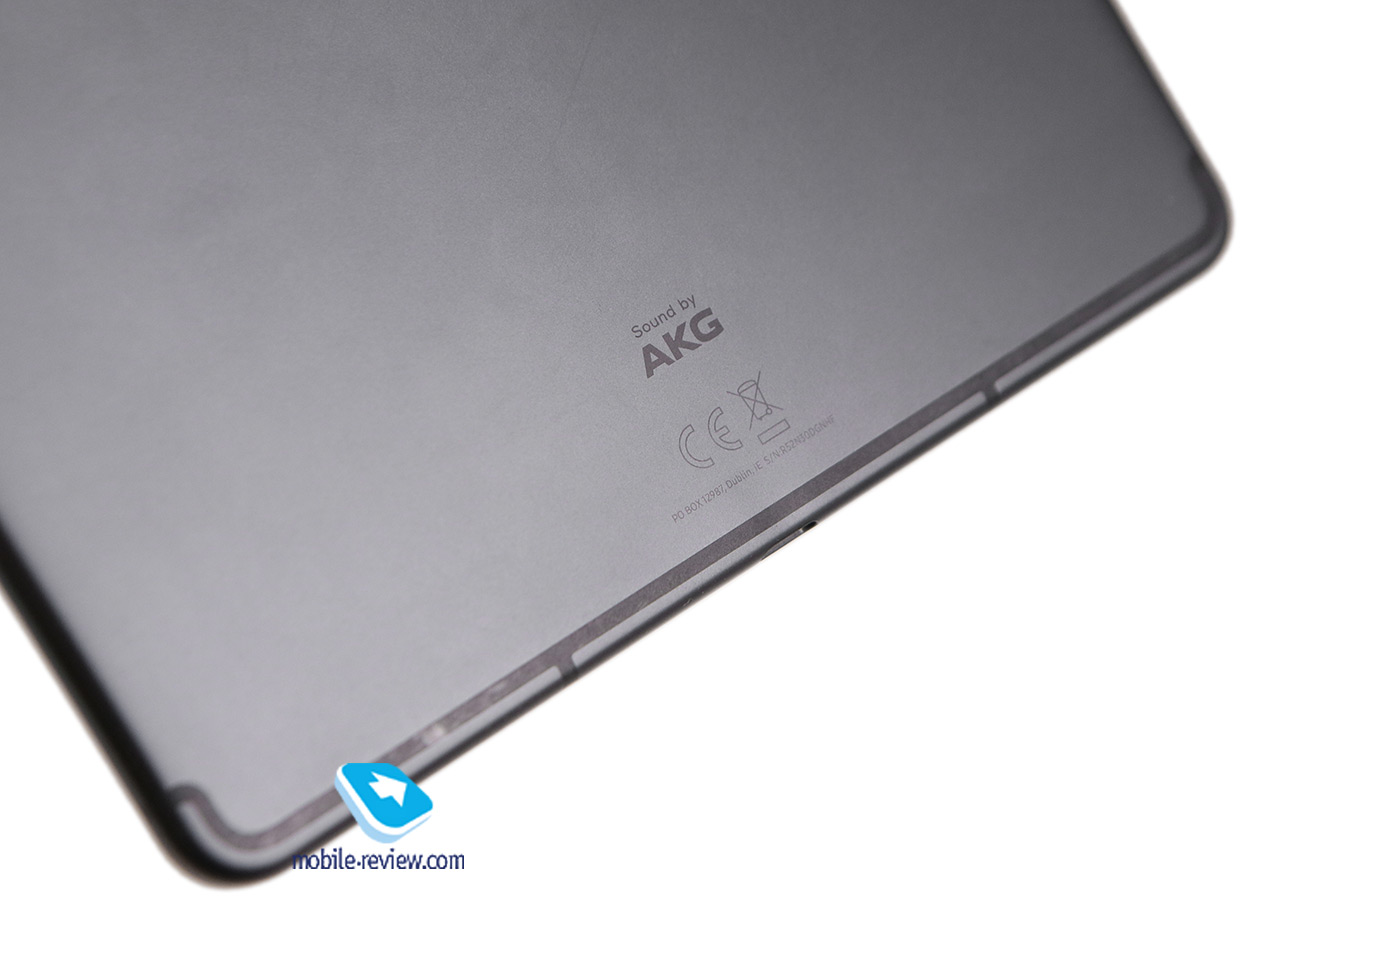  Overview of the mid-range tablet Samsung Galaxy Tab S6 Lite (SM-P610/P615)